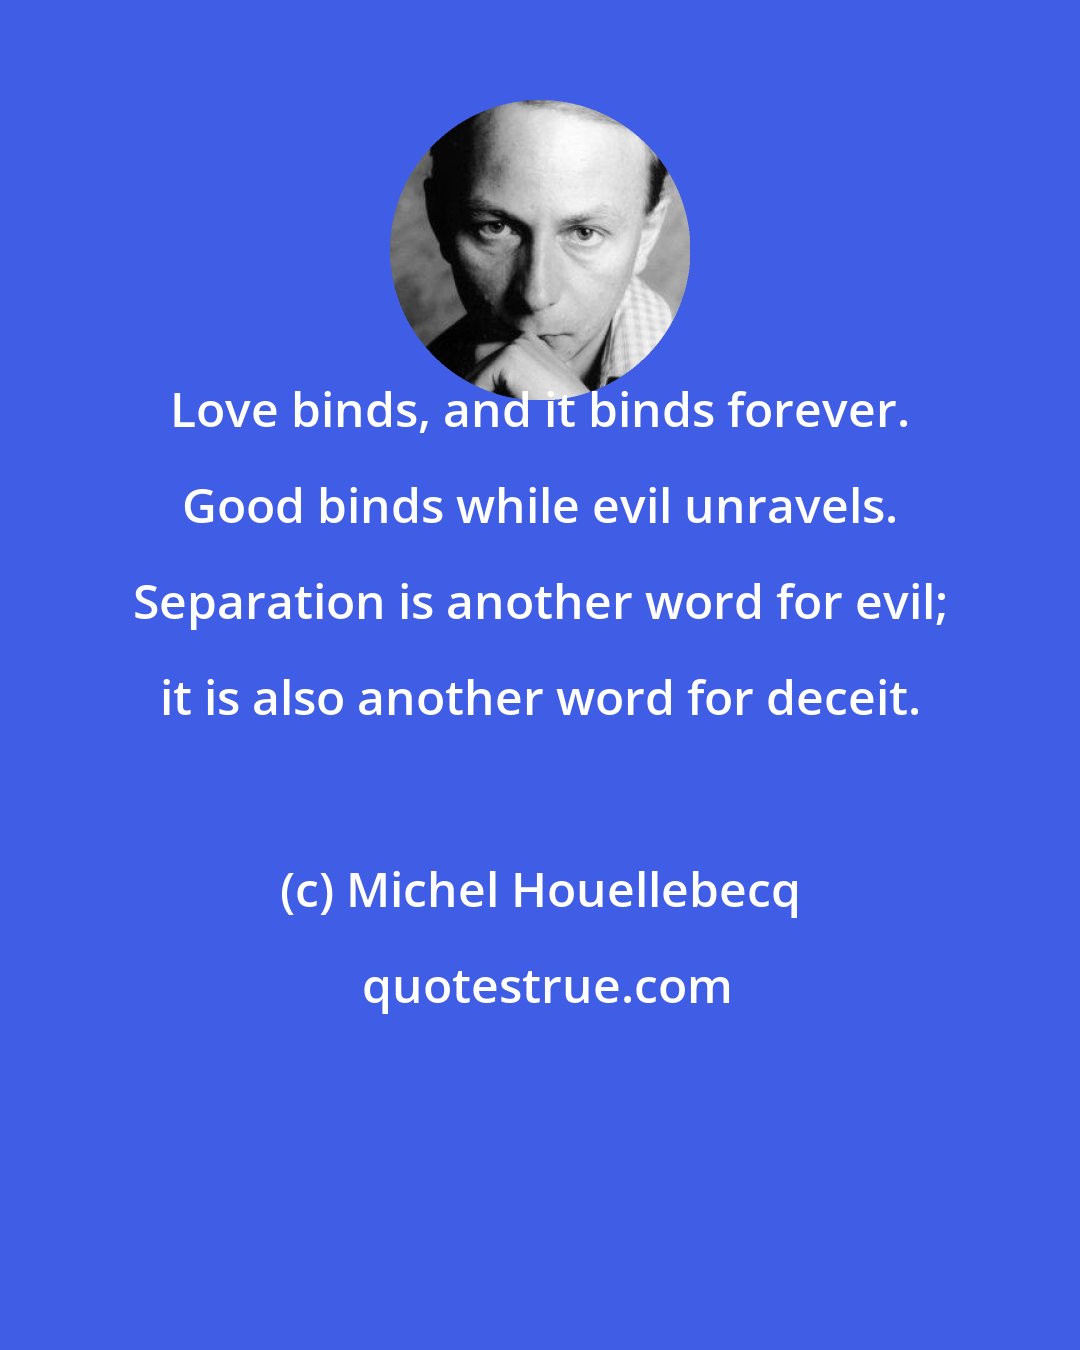 Michel Houellebecq: Love binds, and it binds forever. Good binds while evil unravels. Separation is another word for evil; it is also another word for deceit.